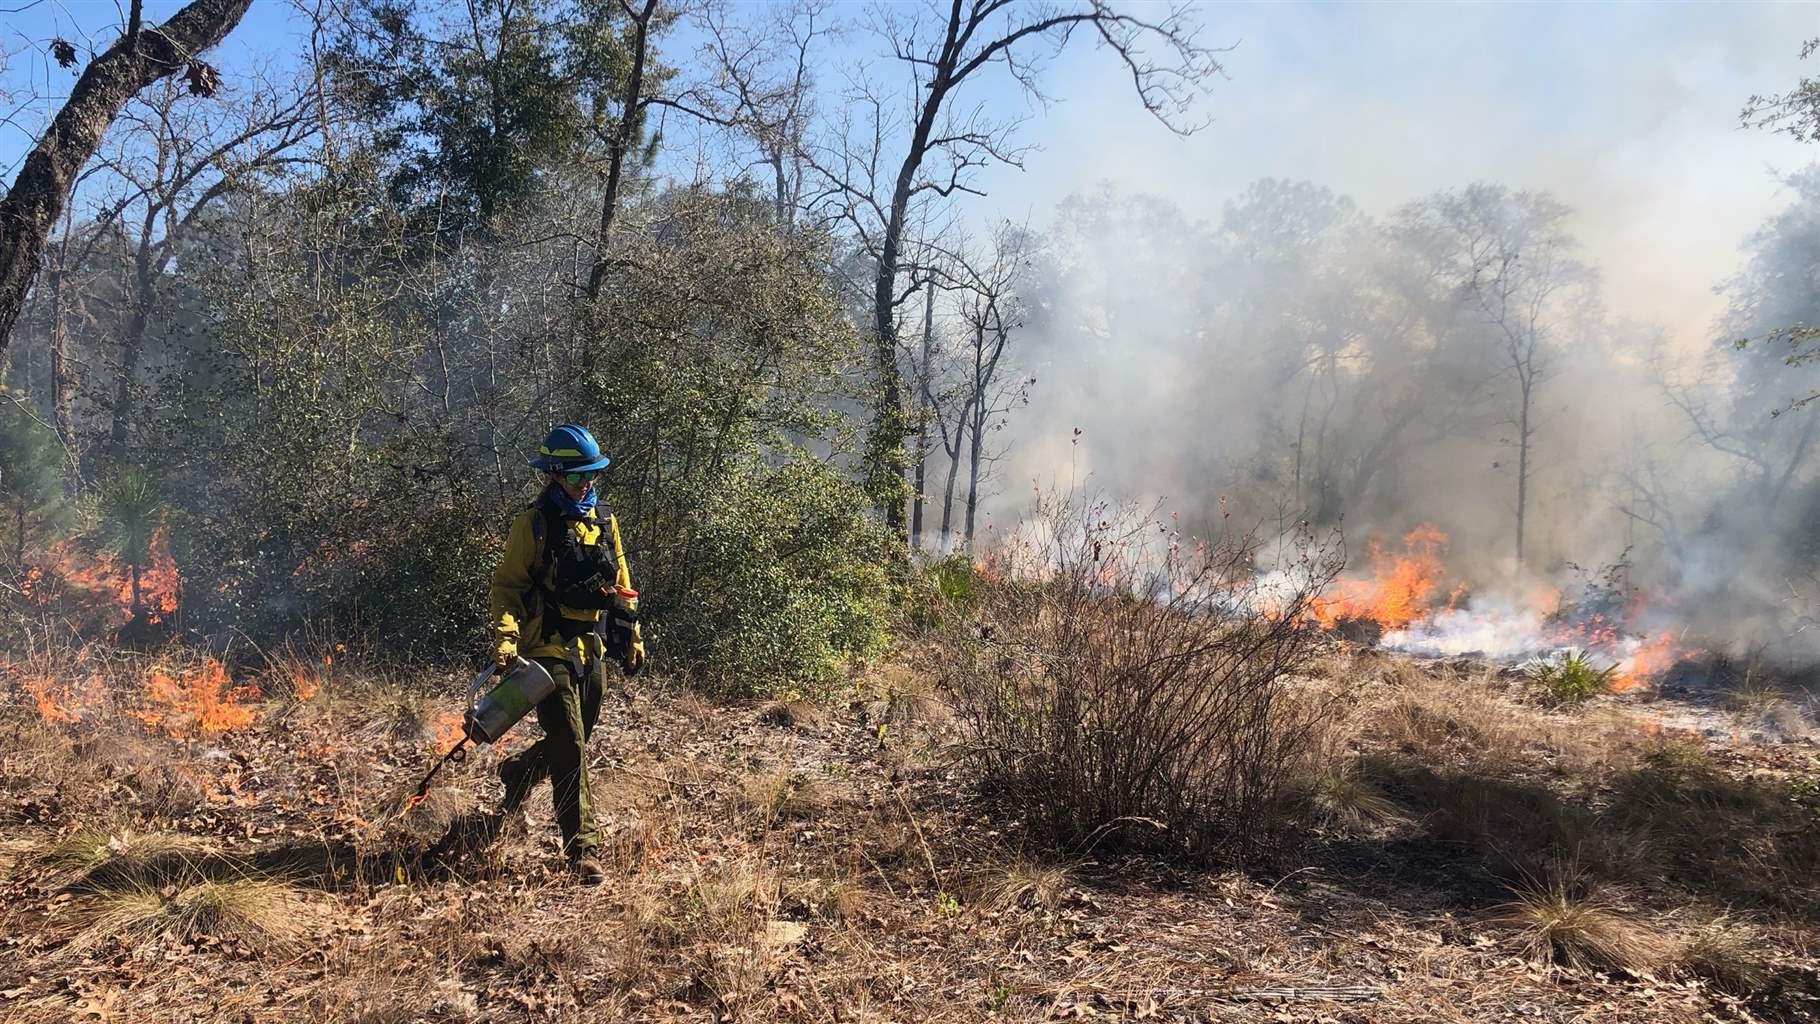 A person in a hard hat and other protective gear walks through a patch of brown, scrubby land with small fires burning behind them. Some small brush and taller trees are visible as well.  